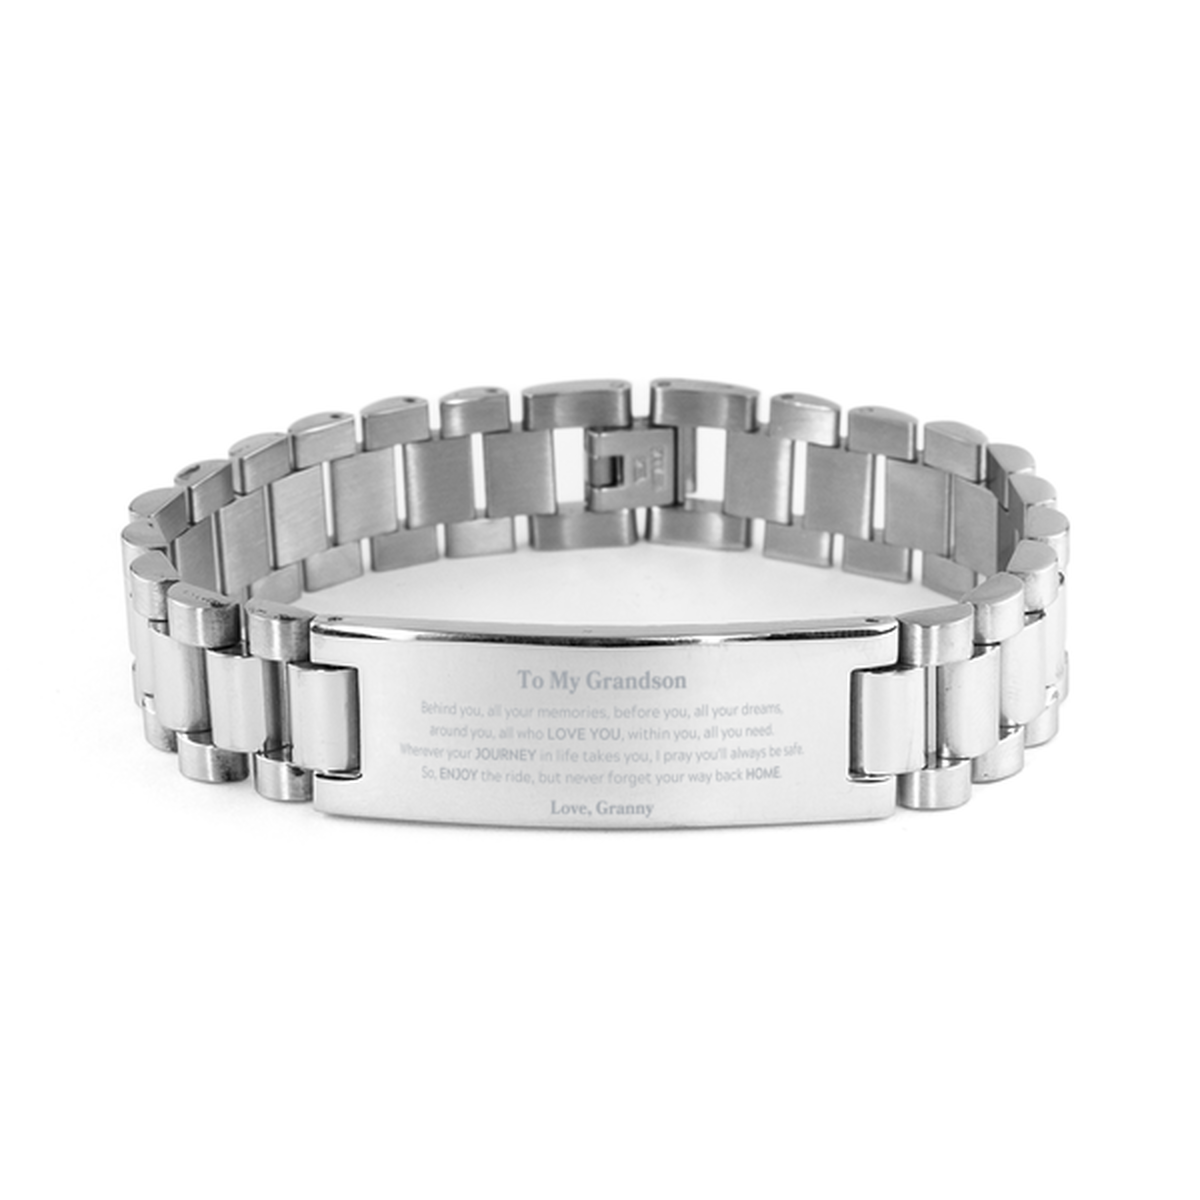 To My Grandson Graduation Gifts from Granny, Grandson Ladder Stainless Steel Bracelet Christmas Birthday Gifts for Grandson Behind you, all your memories, before you, all your dreams. Love, Granny